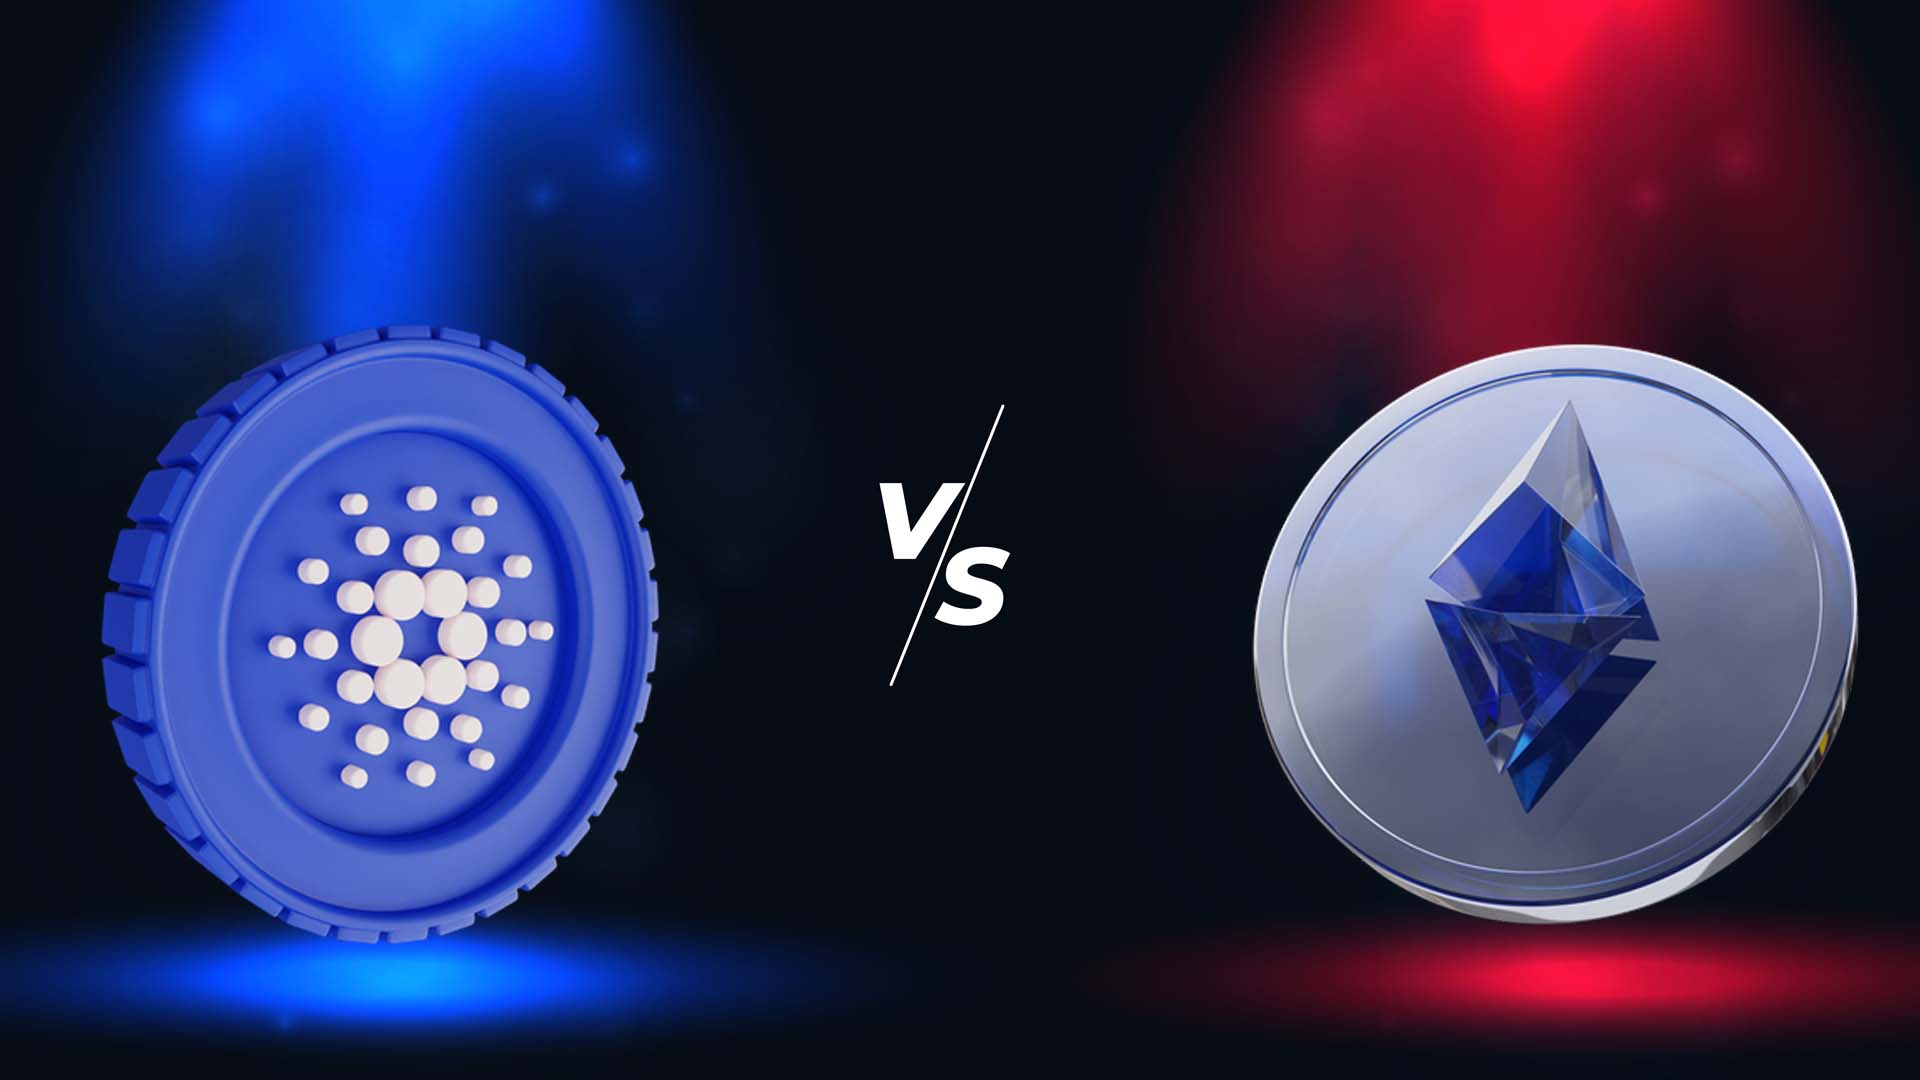 Cardano vs Ethereum: which coin should you invest in right now?